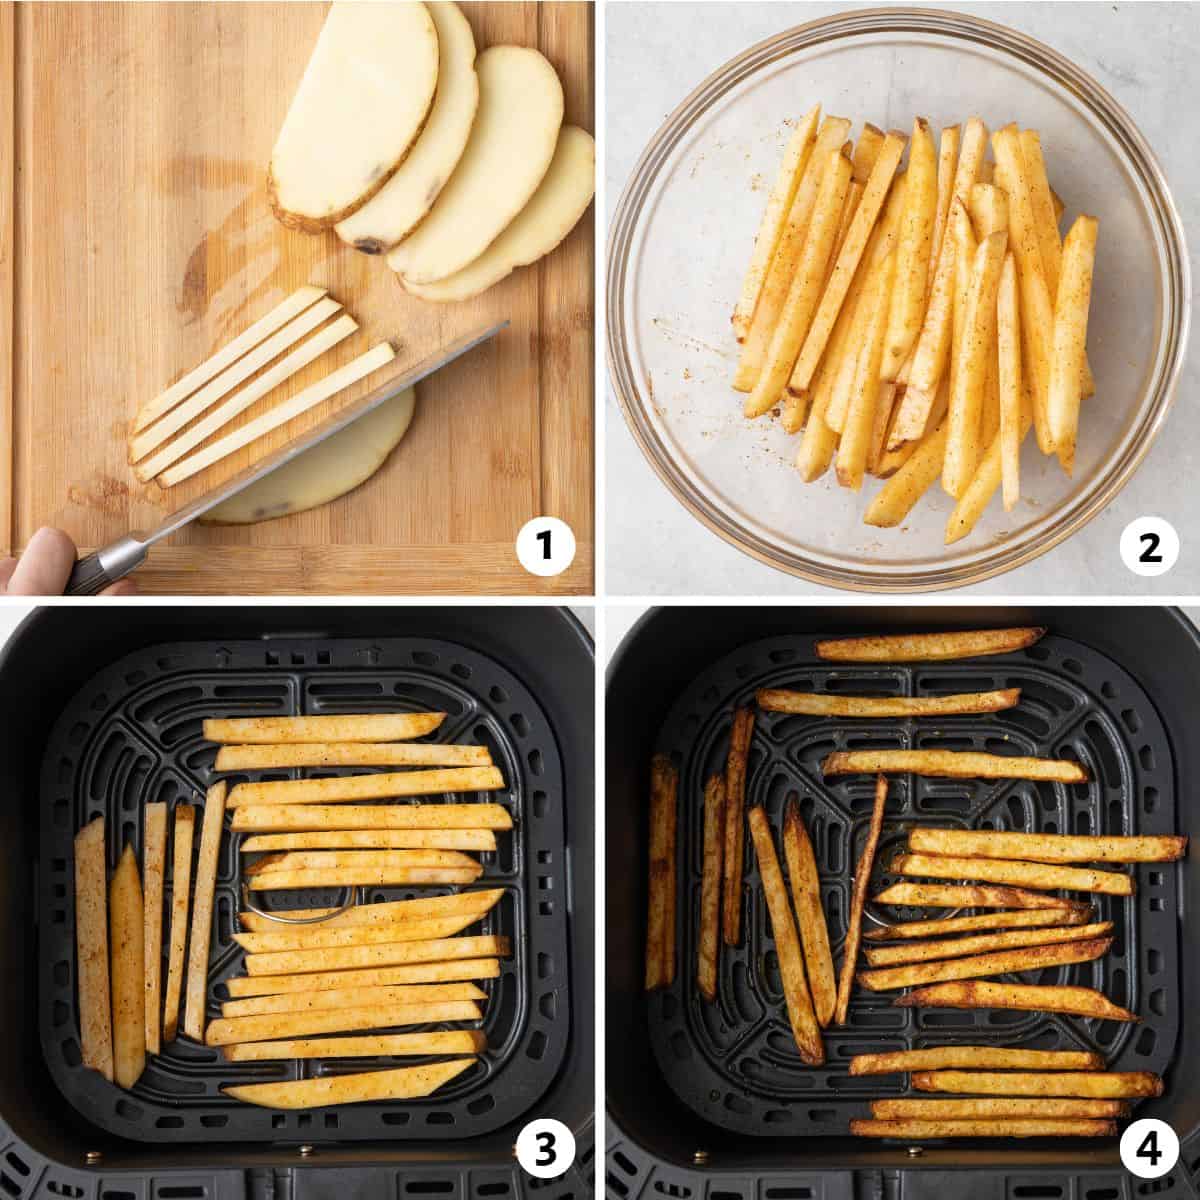 4 image collage making recipe: 1-cutting potatoes into sticks, 2- cut potatoes in a bowl tossed in spices, 3- uncooked potato sticks in air fryer basket, 4- french fries after being air fried in basket.